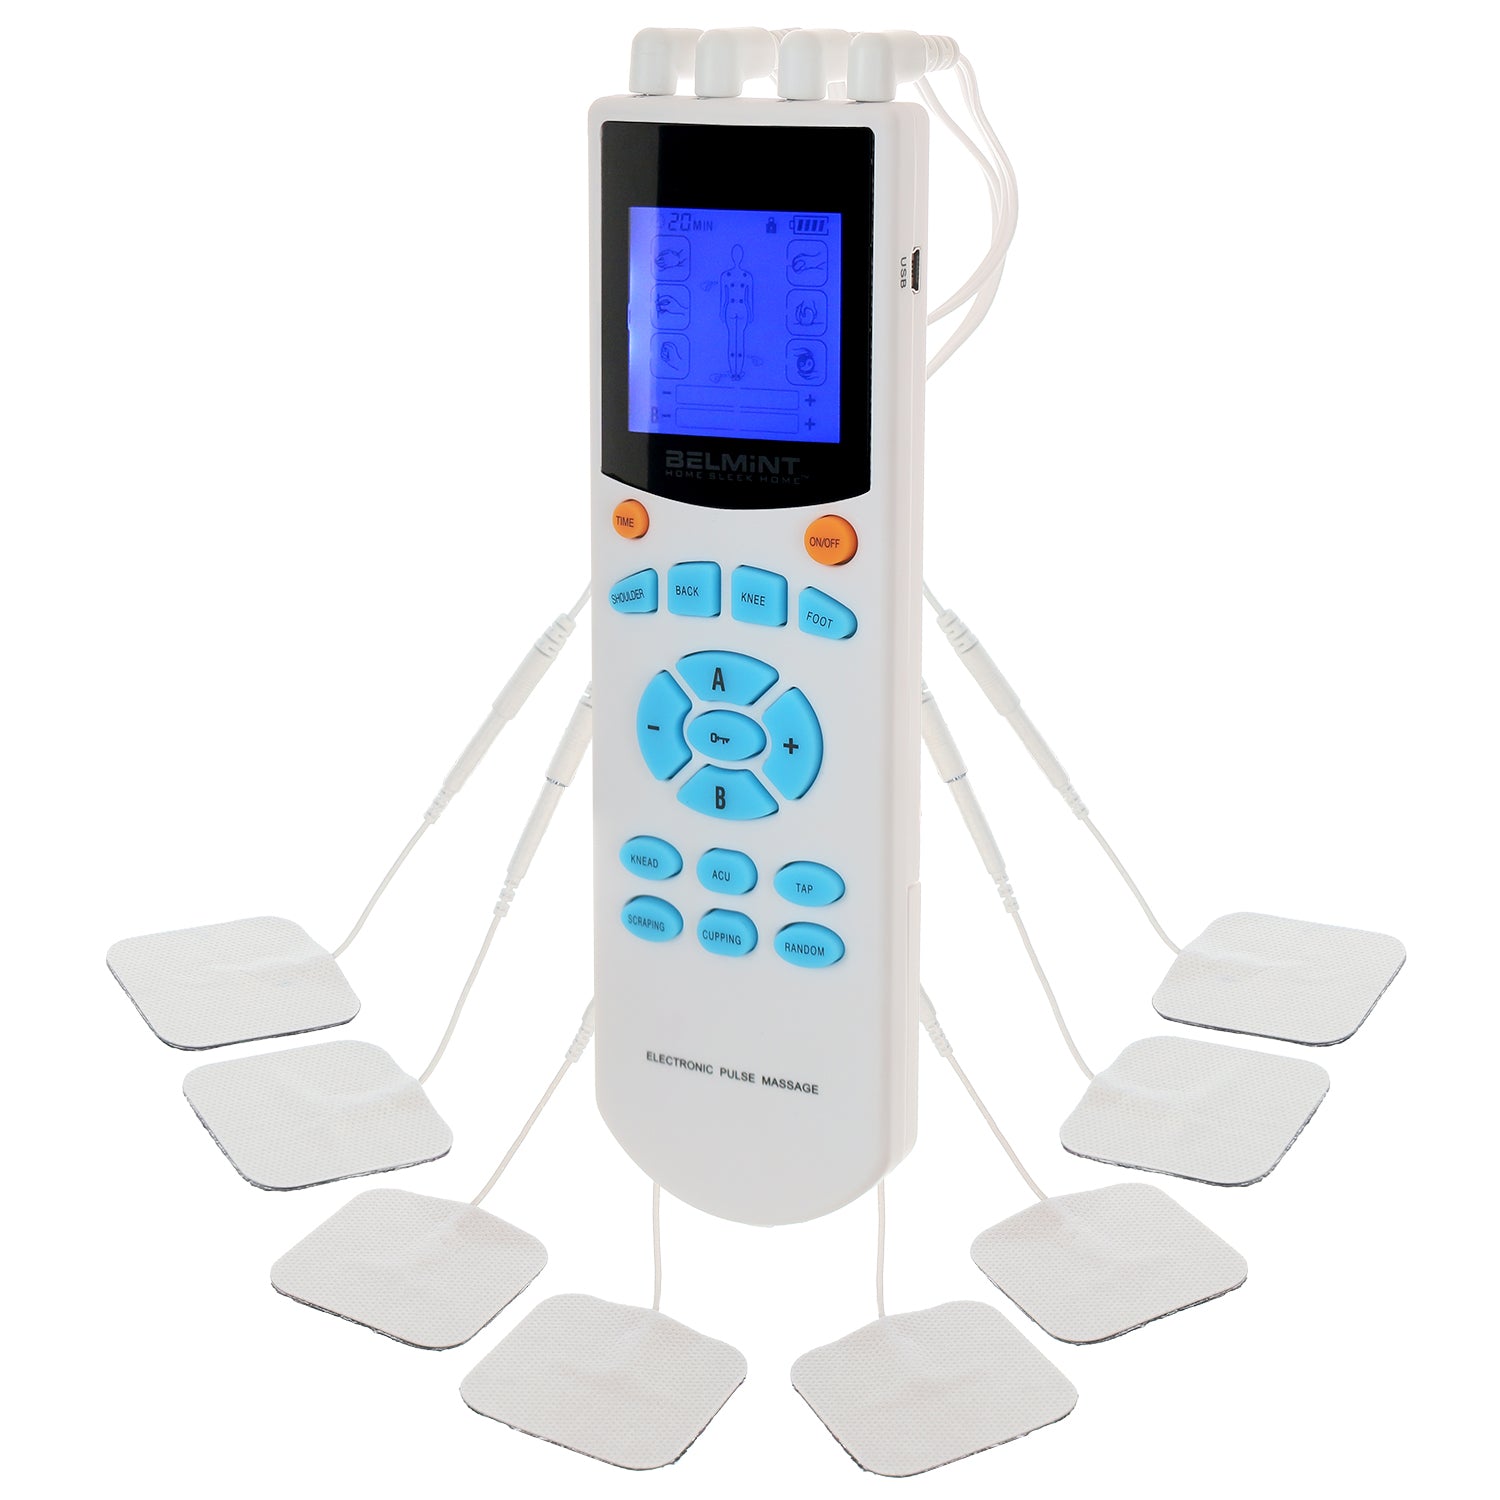 2017 Hot Sale Advanced Tens Unit / Tens Machine Massager for Muscles and  Joints / Best Tens Electronic Pulse Massager - China Tens Unit, Tens Machine